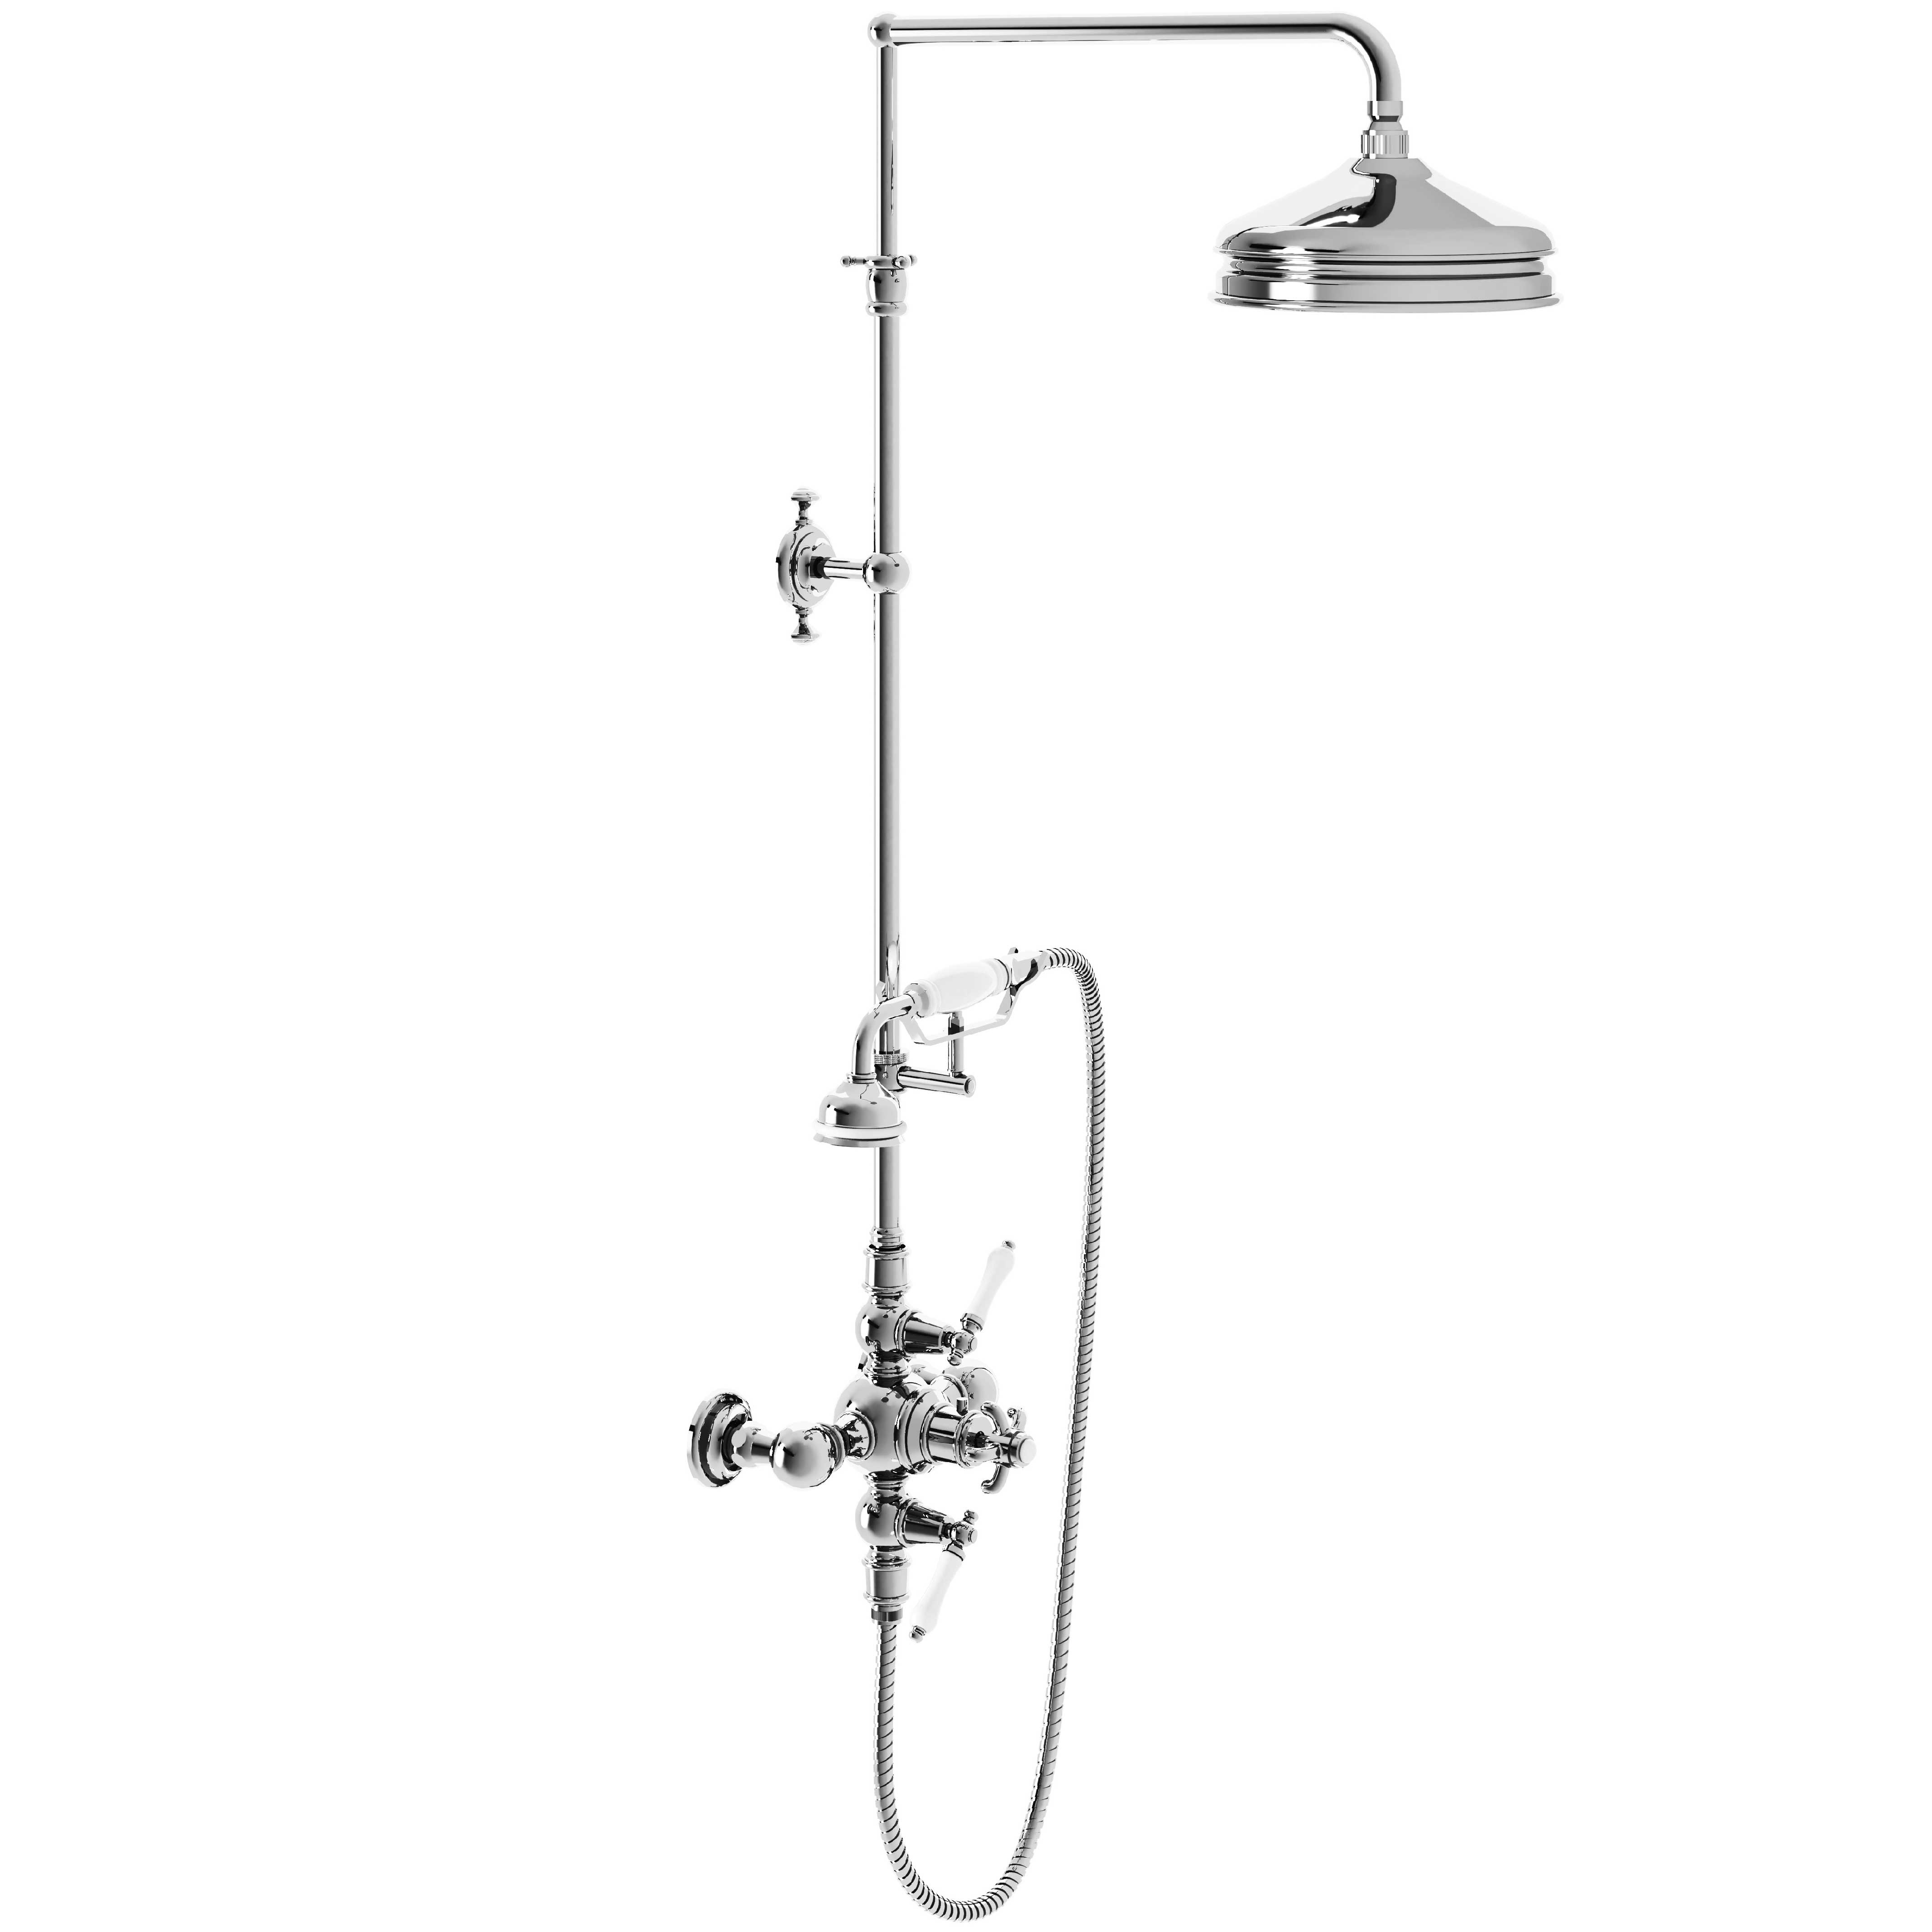 M01-2204T Thermo. shower mixer with column, anti-scaling